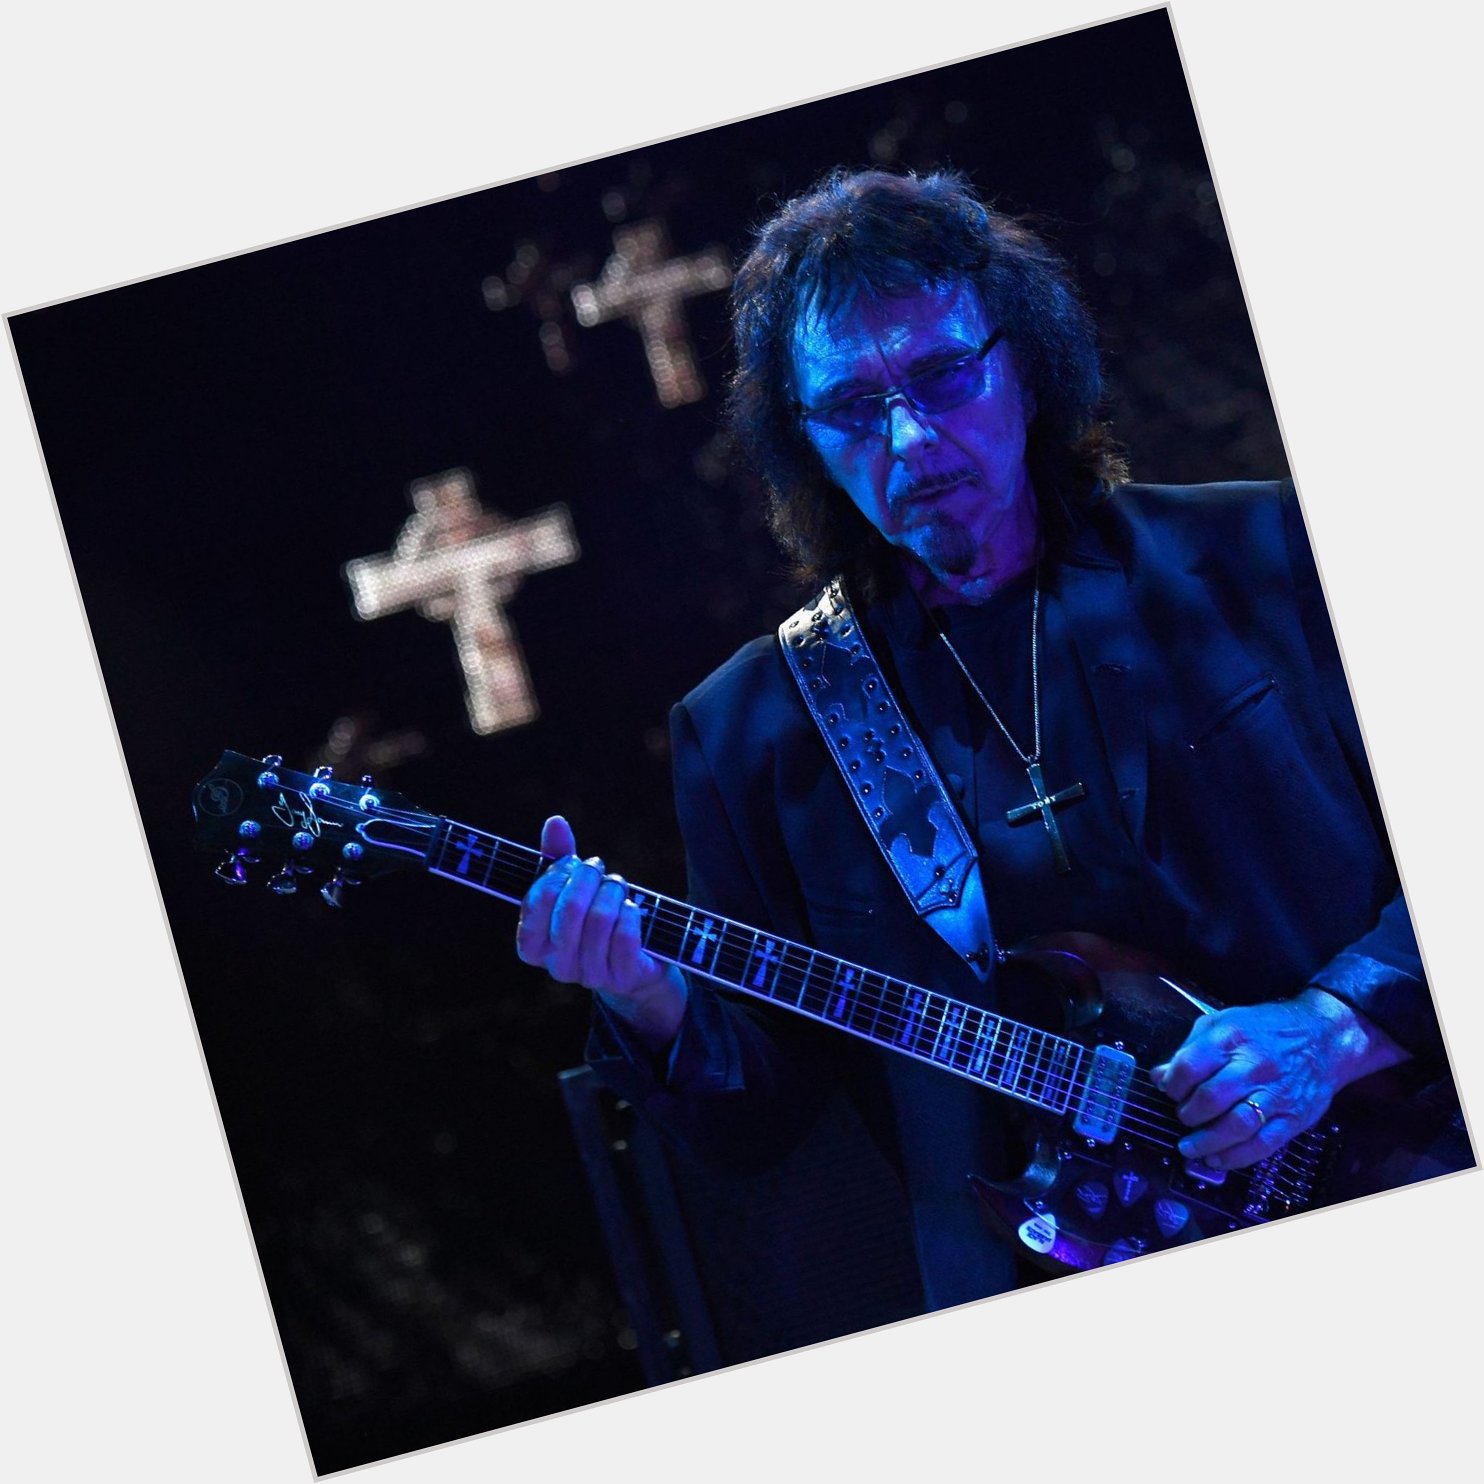 Happy birthday and hats off to the godfather of heavy metal, Sir Tony Iommi. Legend     